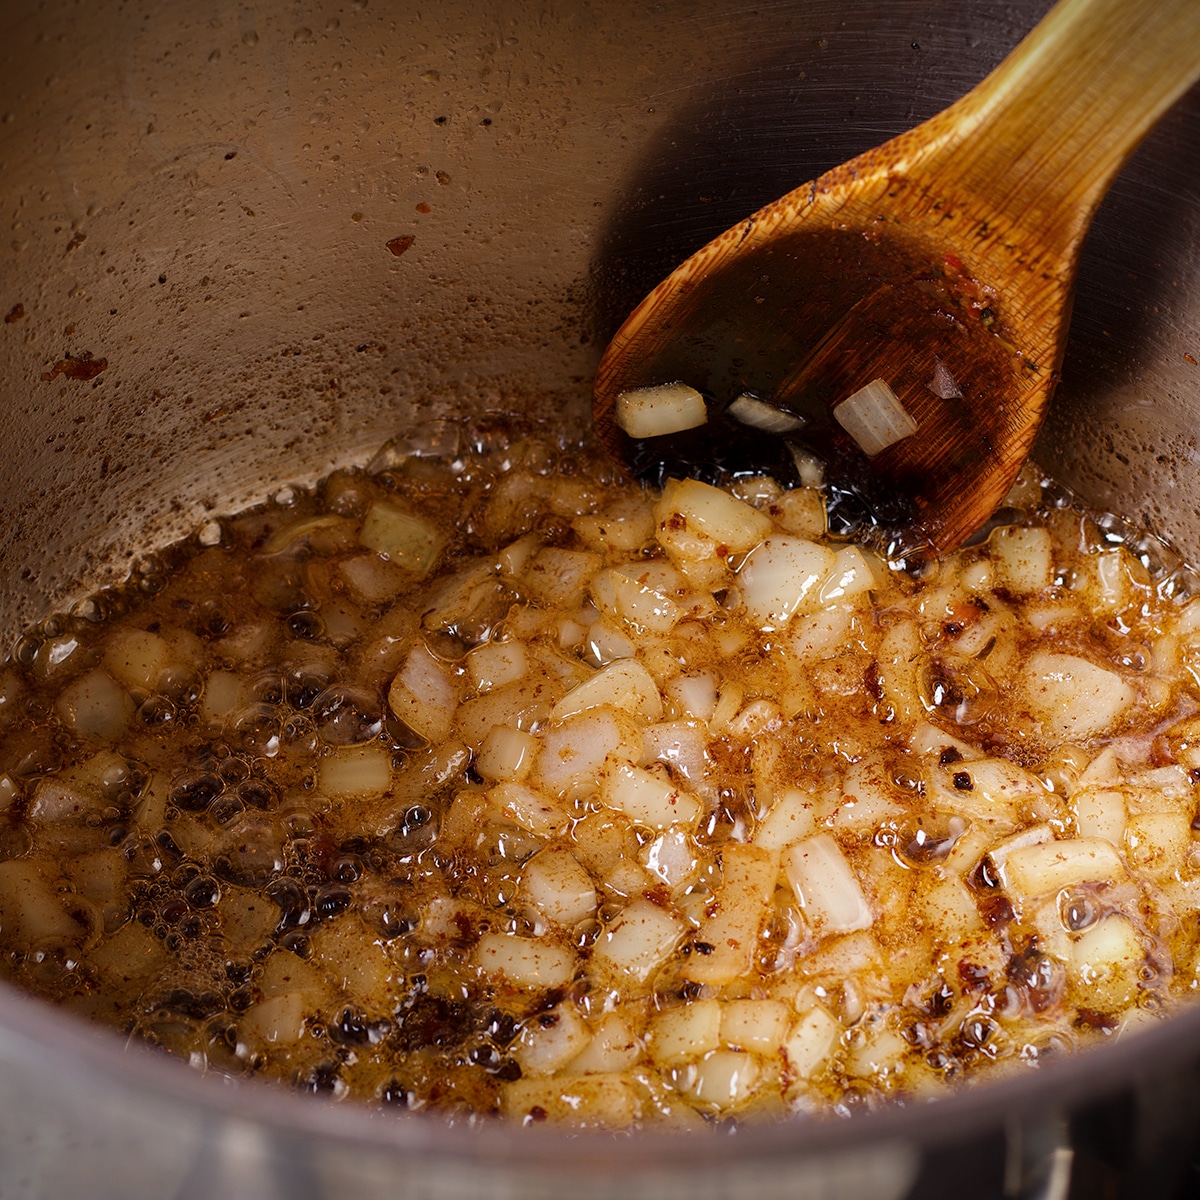 Chopped onion, garlic, and spices cooking in hot oil in a large saucepan.